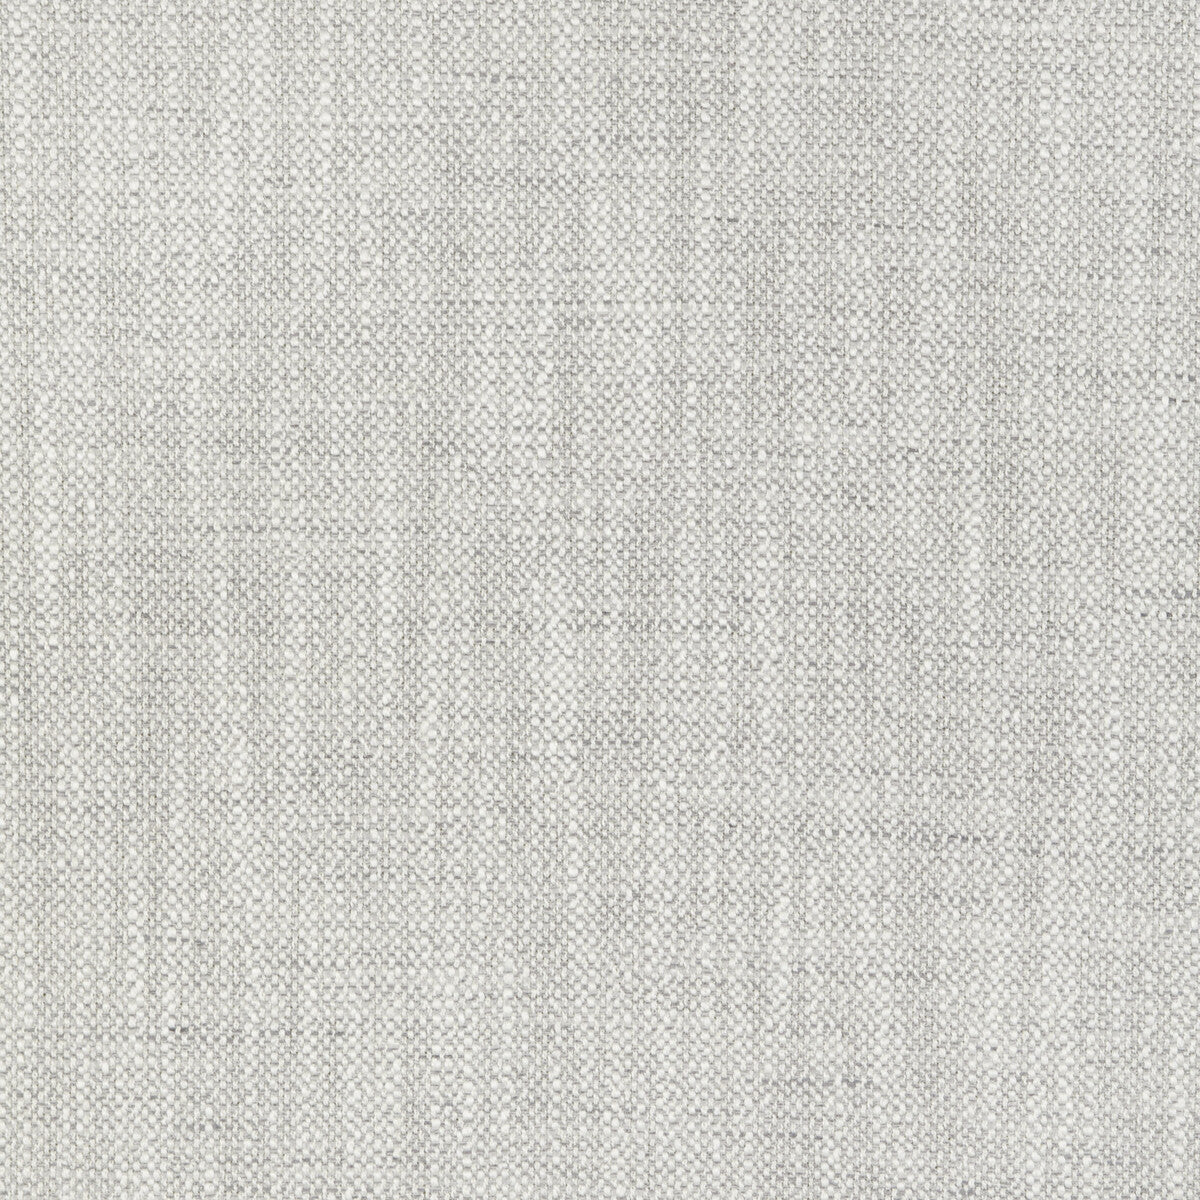 Evening Star fabric in steel color - pattern 36537.1101.0 - by Kravet Basics in the Candice Olson collection